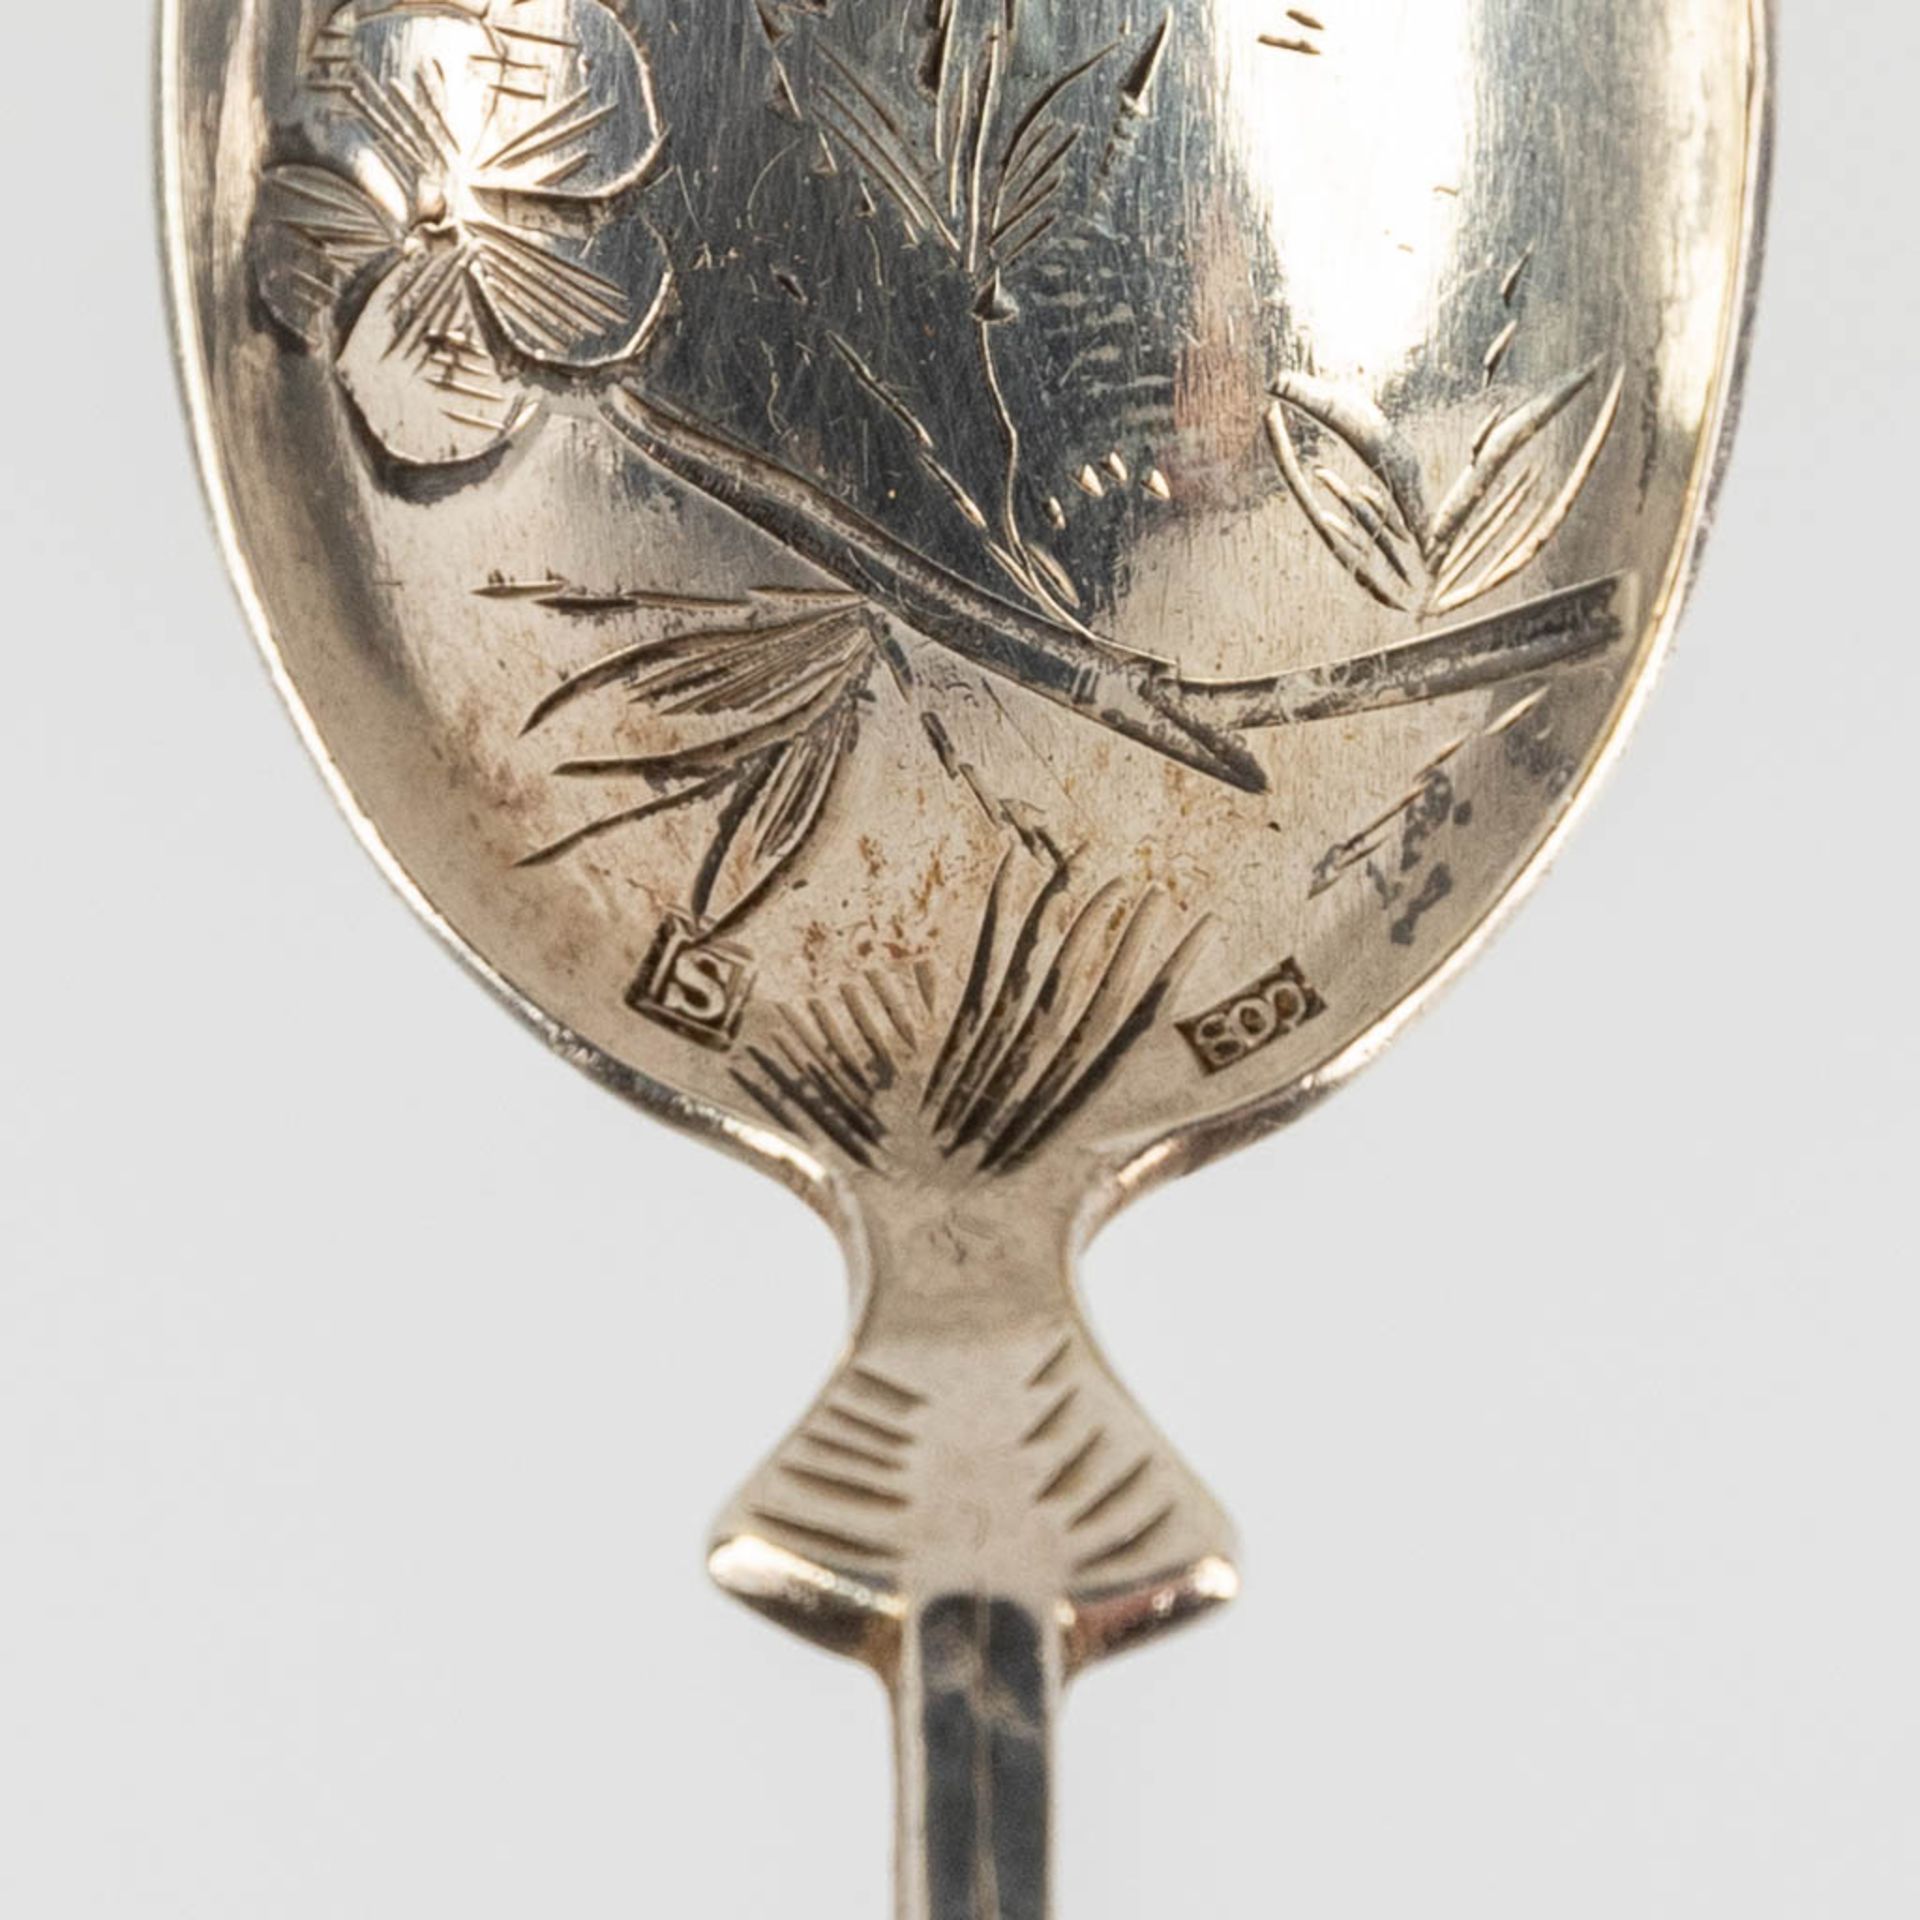 Two Ecrins with silver spoons, added 1 Ecrin with pieces of silver-plated cutlery marked Boulinger. - Image 18 of 18